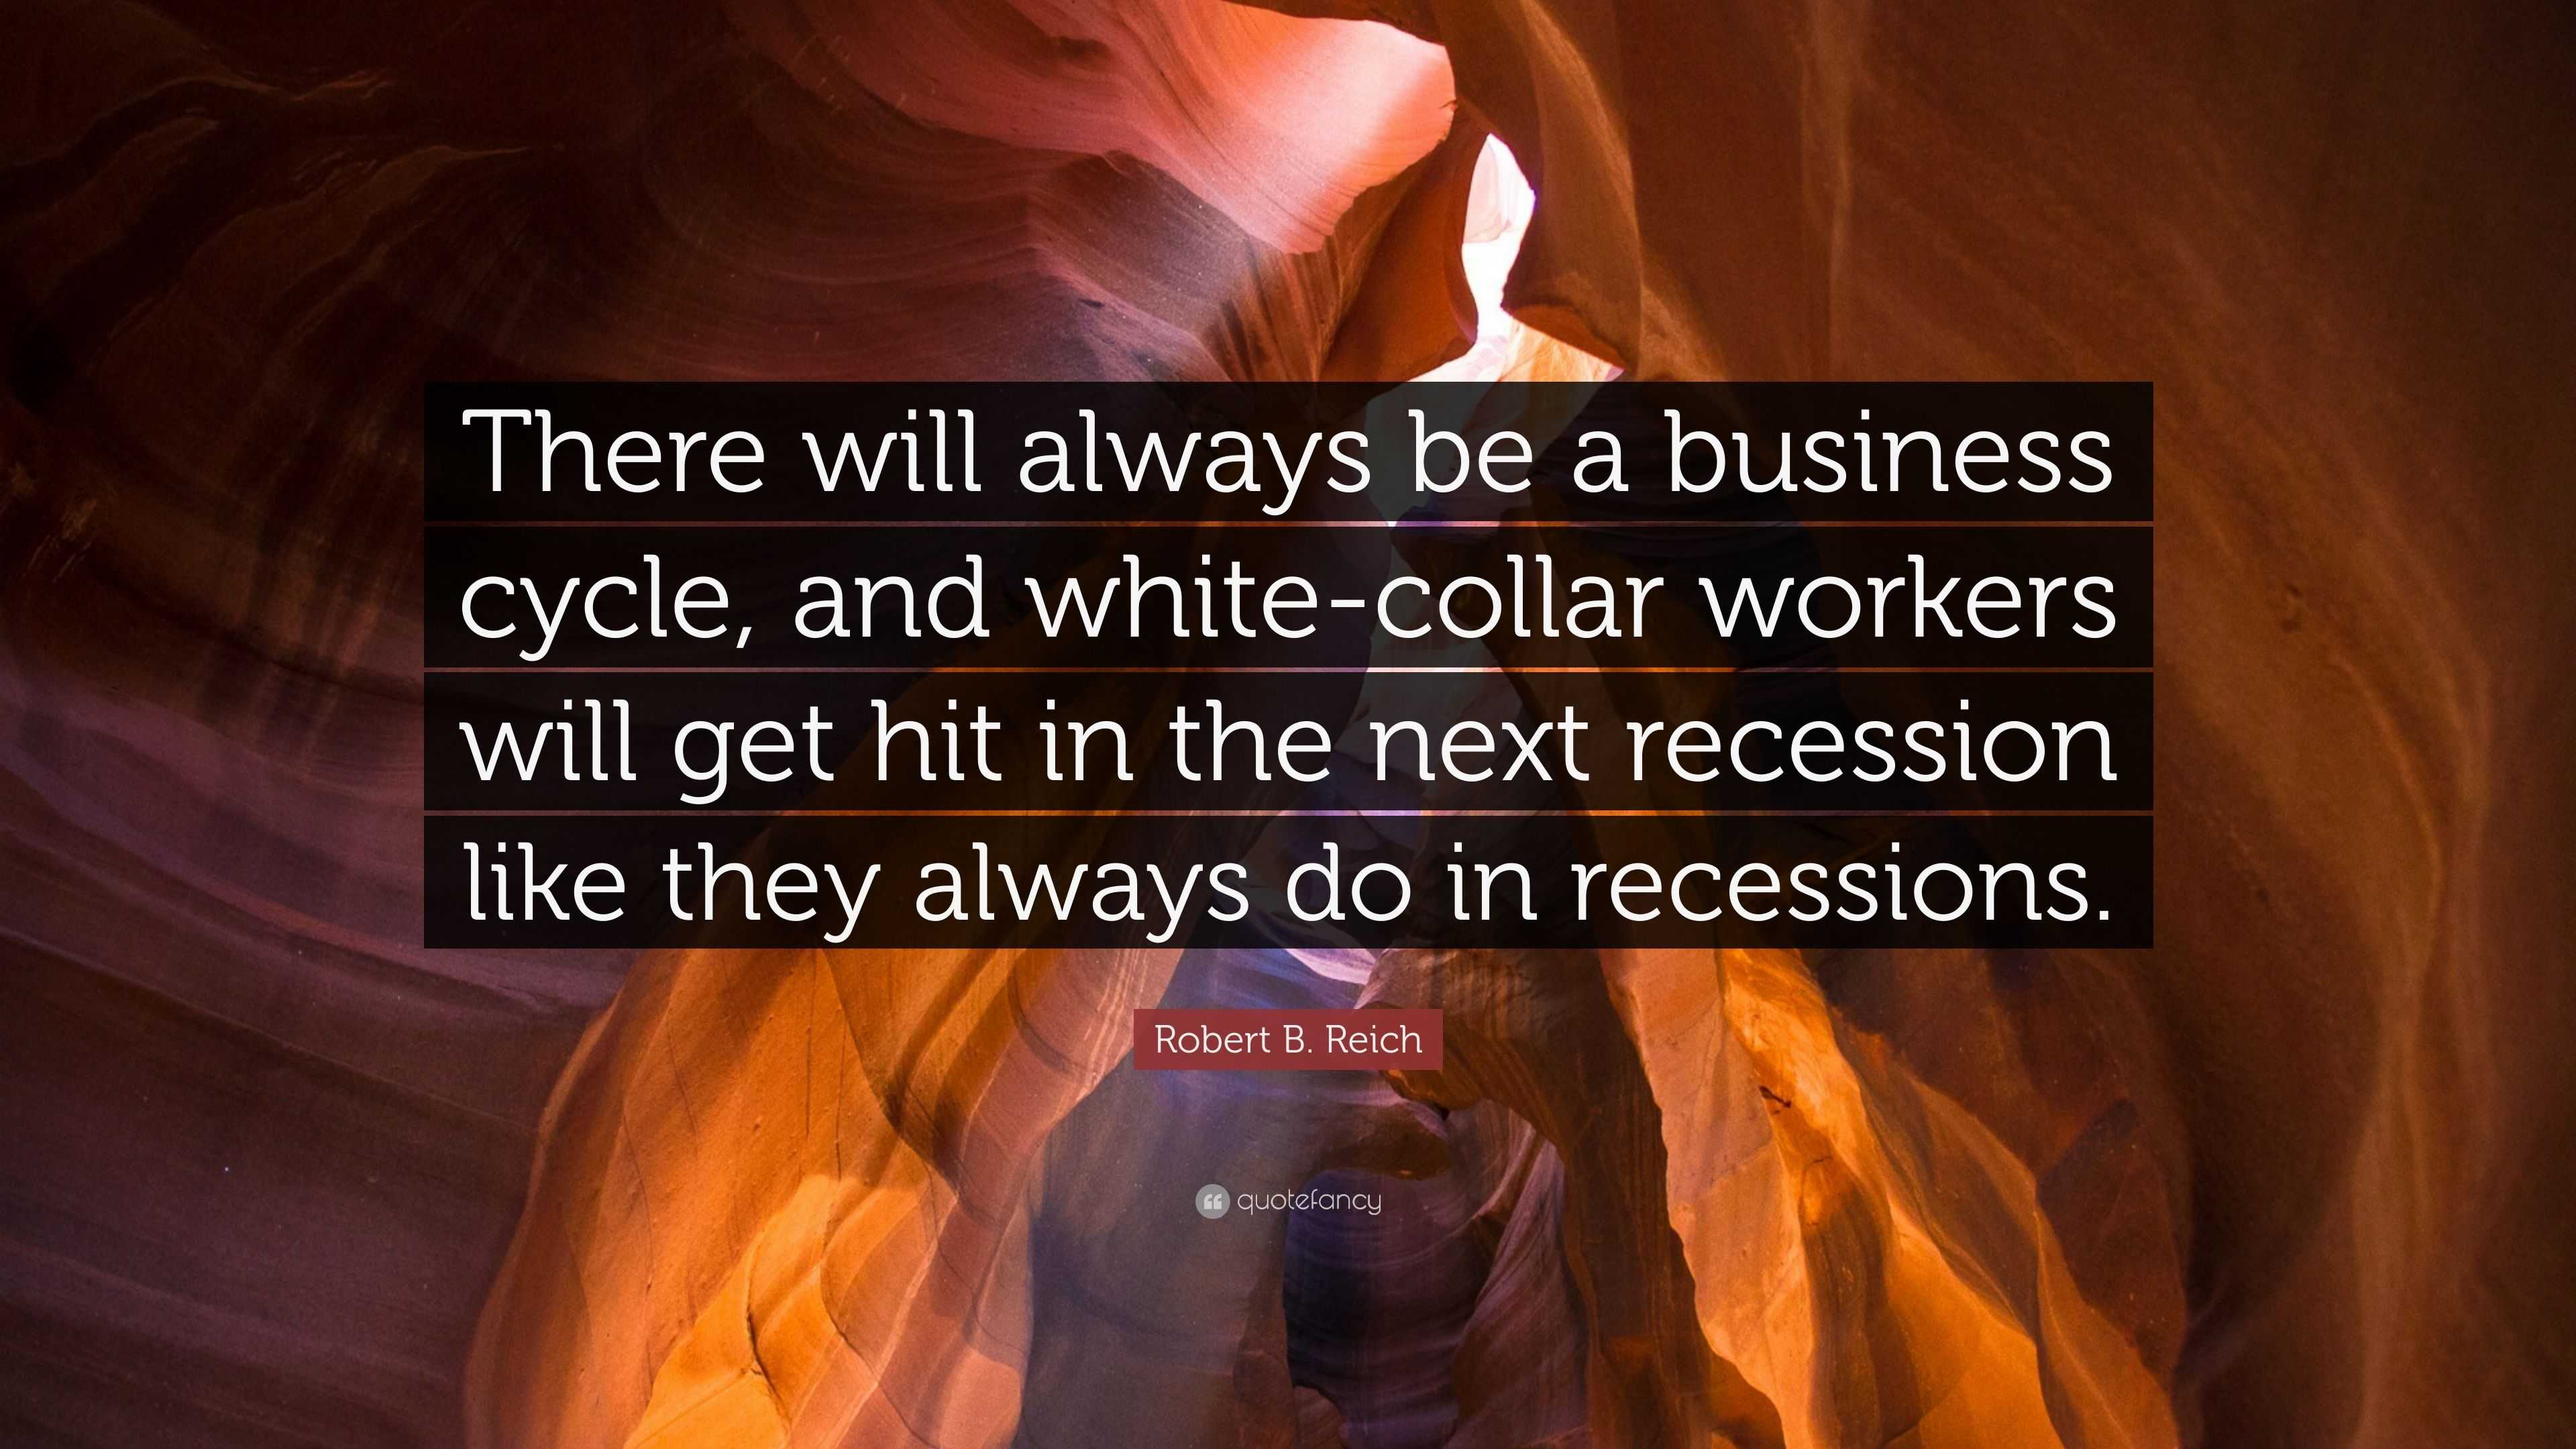 Robert B. Reich Quote “There will always be a business cycle, and